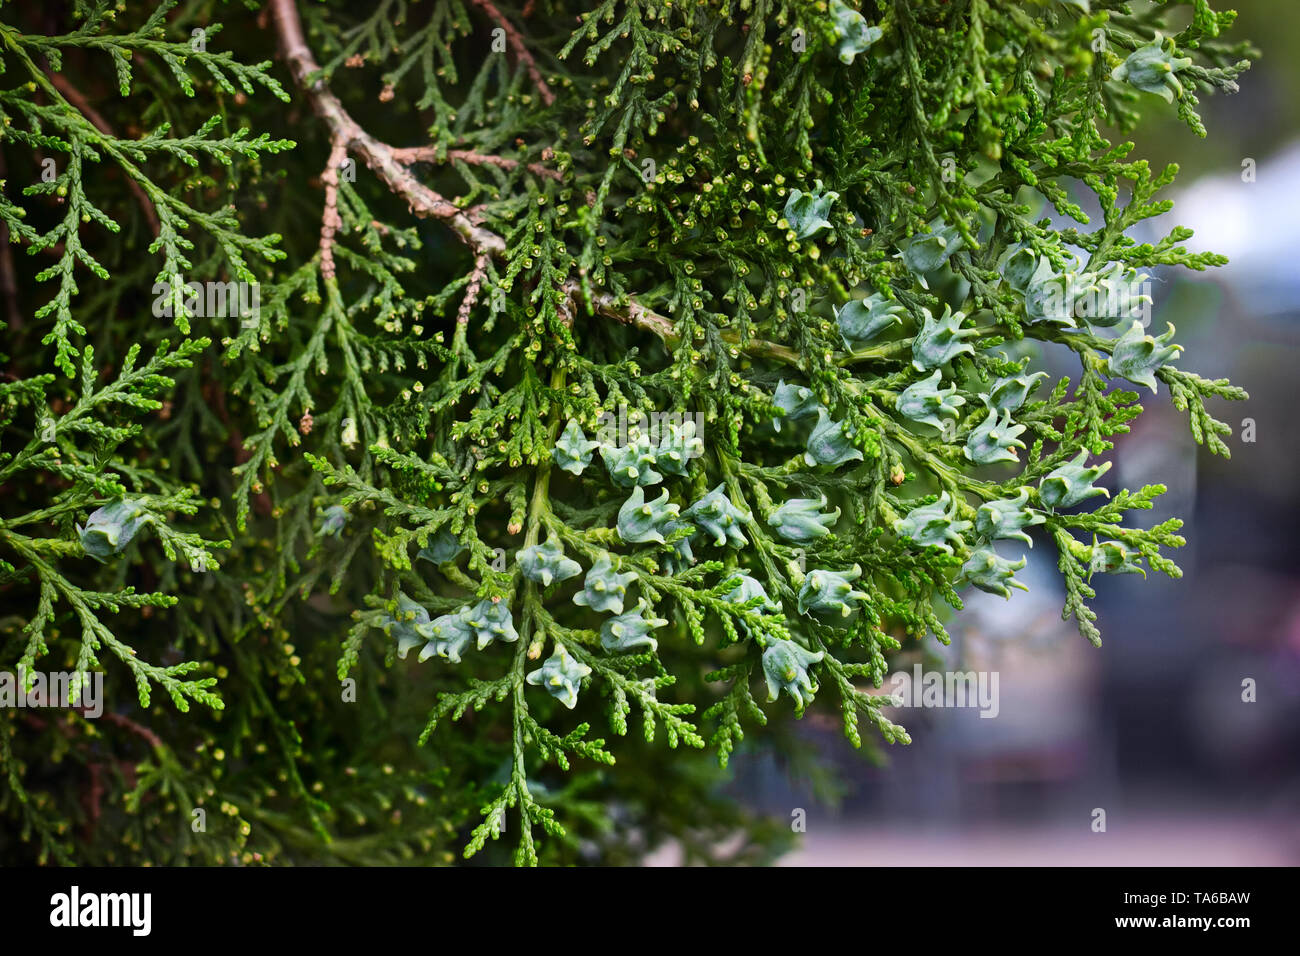 Evergreen needles of young cypress in botany garden close-up. Stock Photo